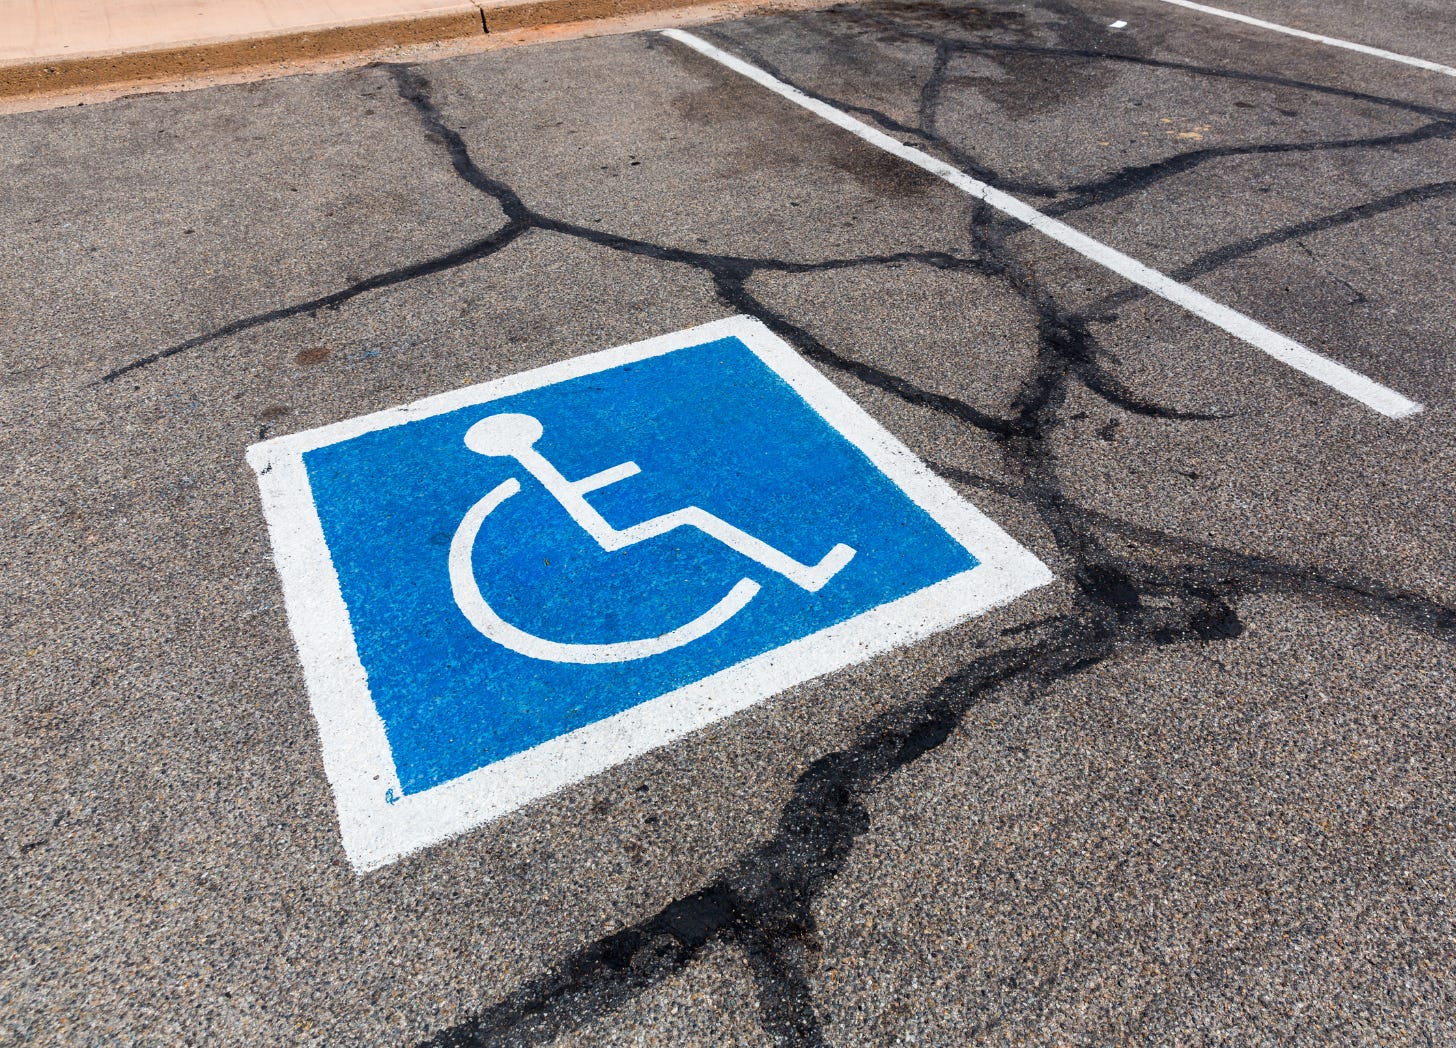 Wheelchair symbol painted onto paveement to mark parking space